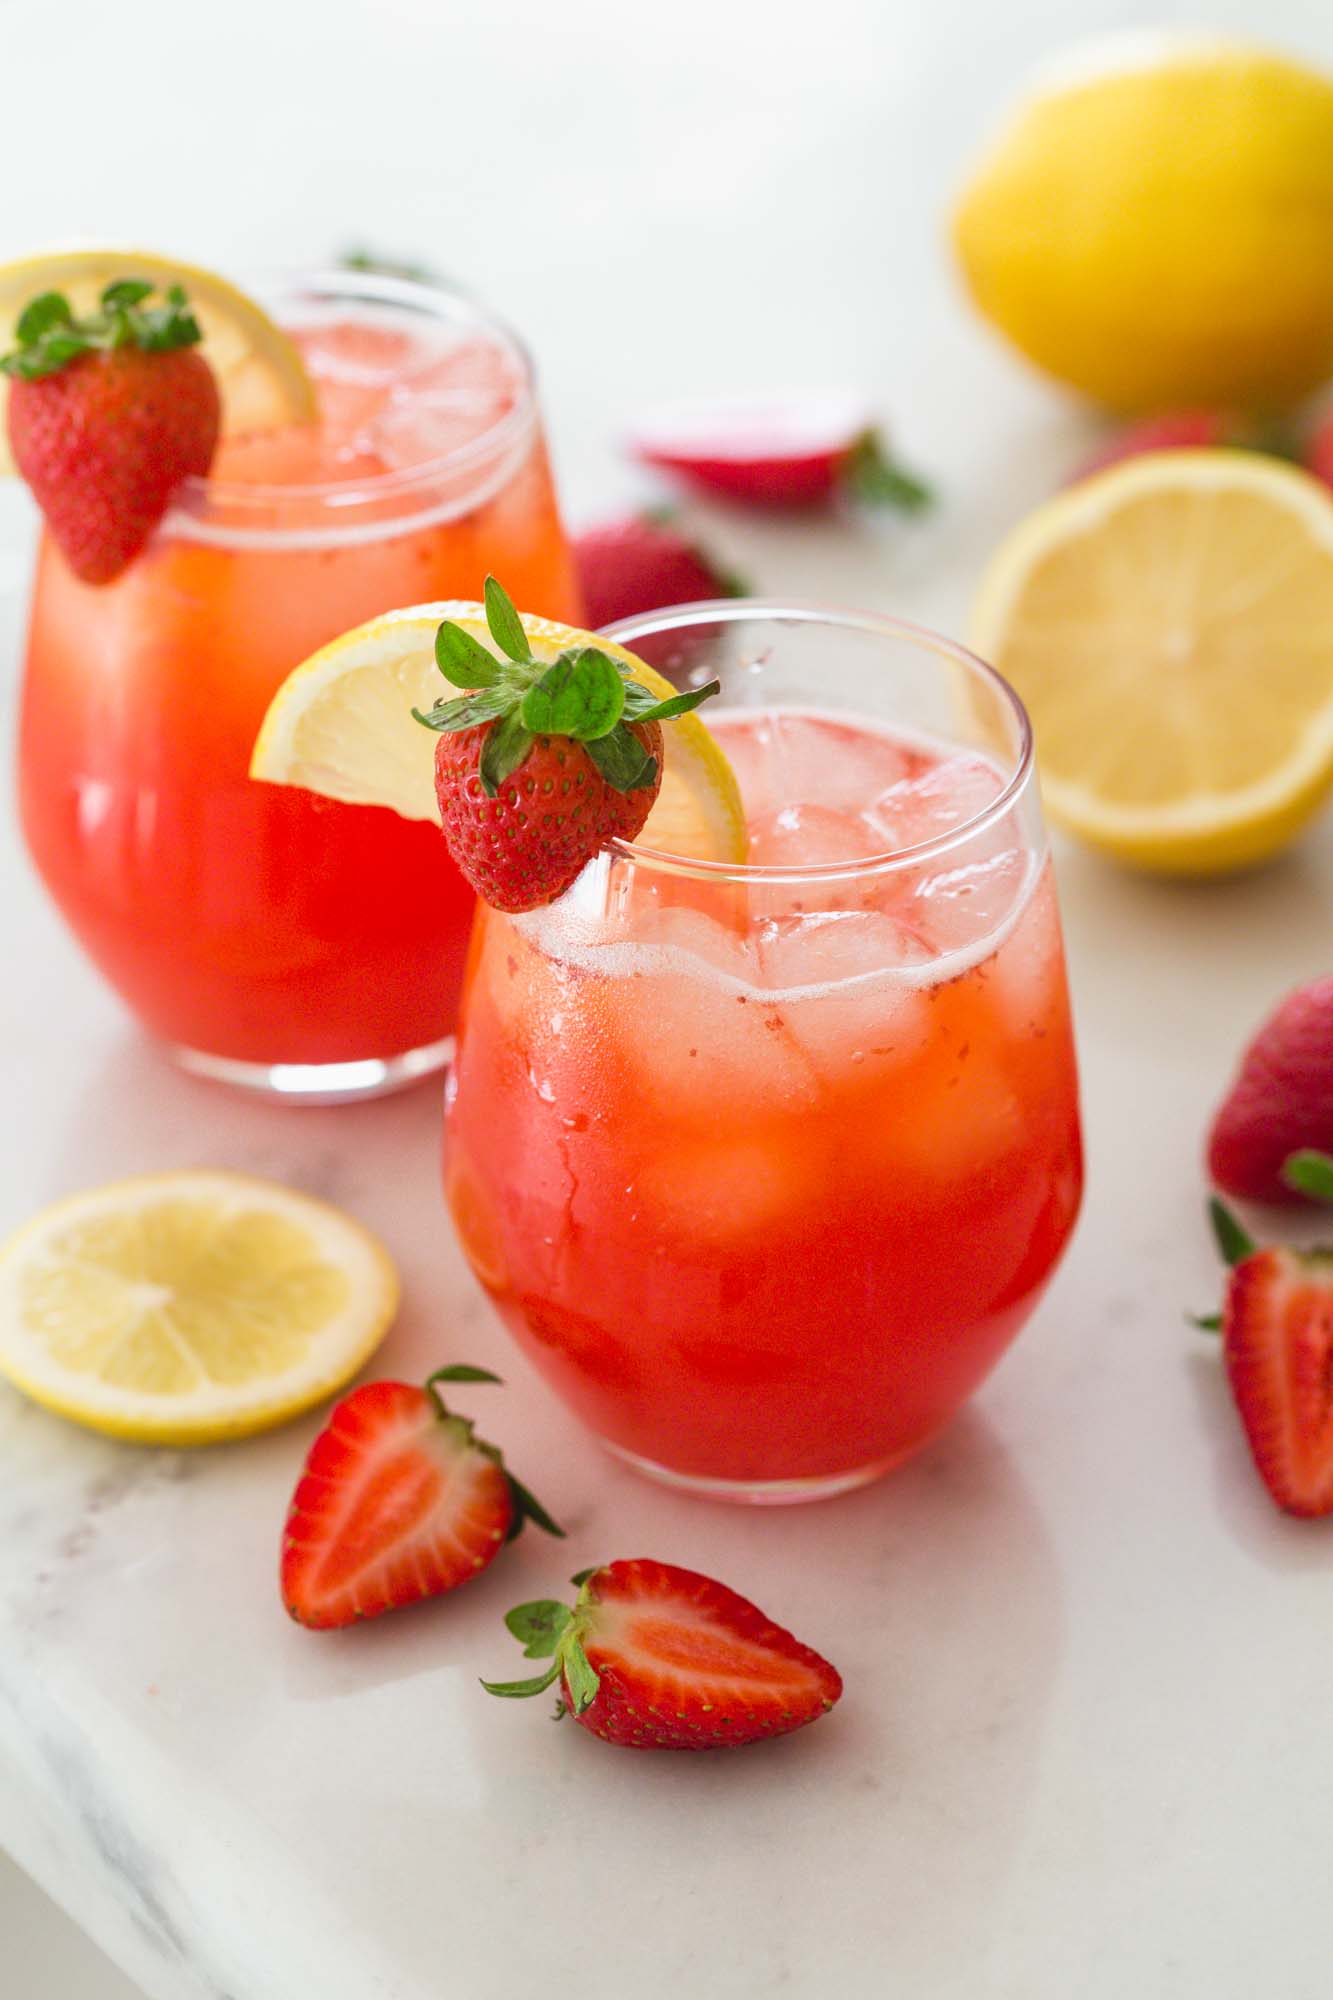 Chilled strawberry lemonade served with ice in two glasses, placed on a white marble counter